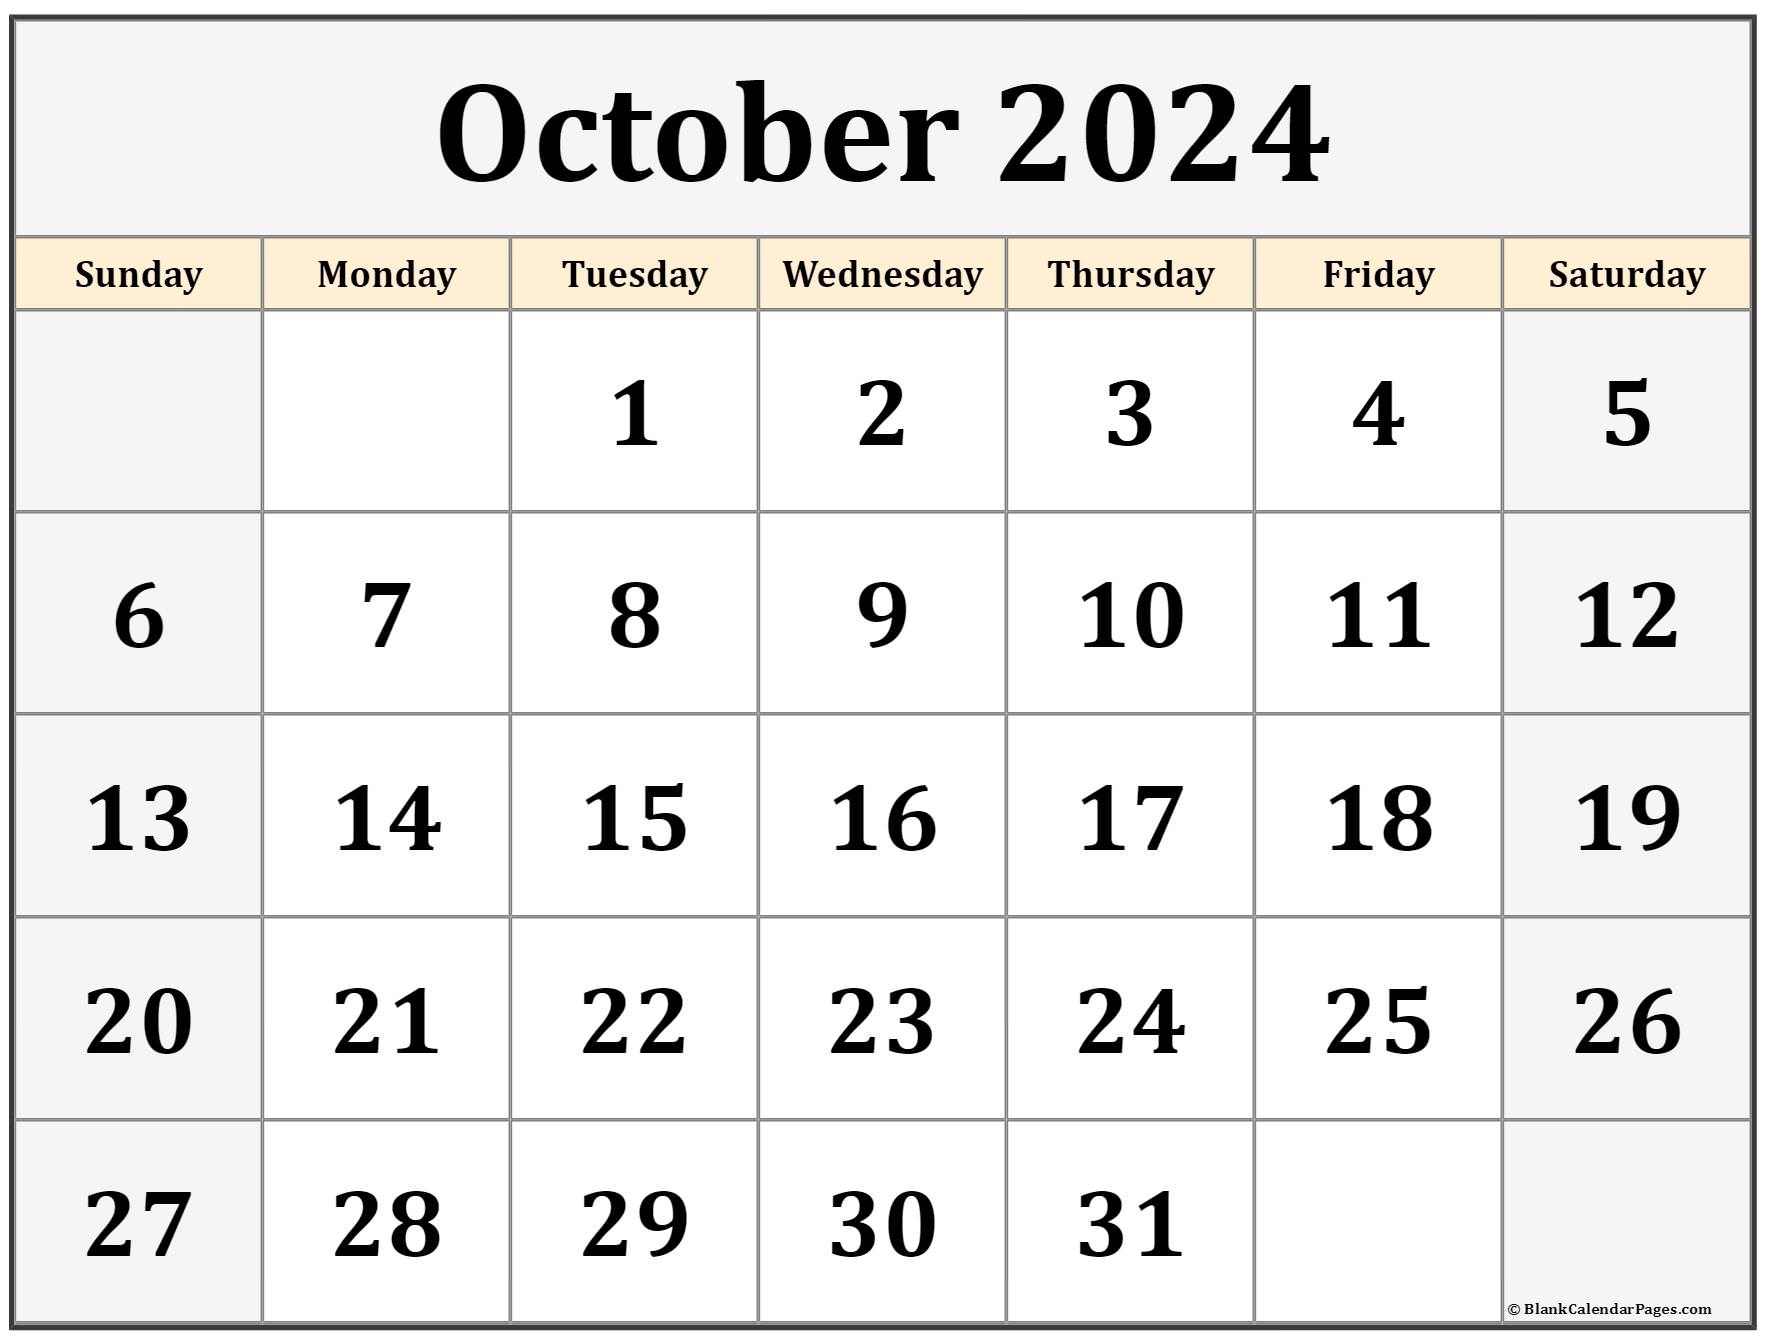 Calendar October 2024 Printable Your Guide to an Organized Month